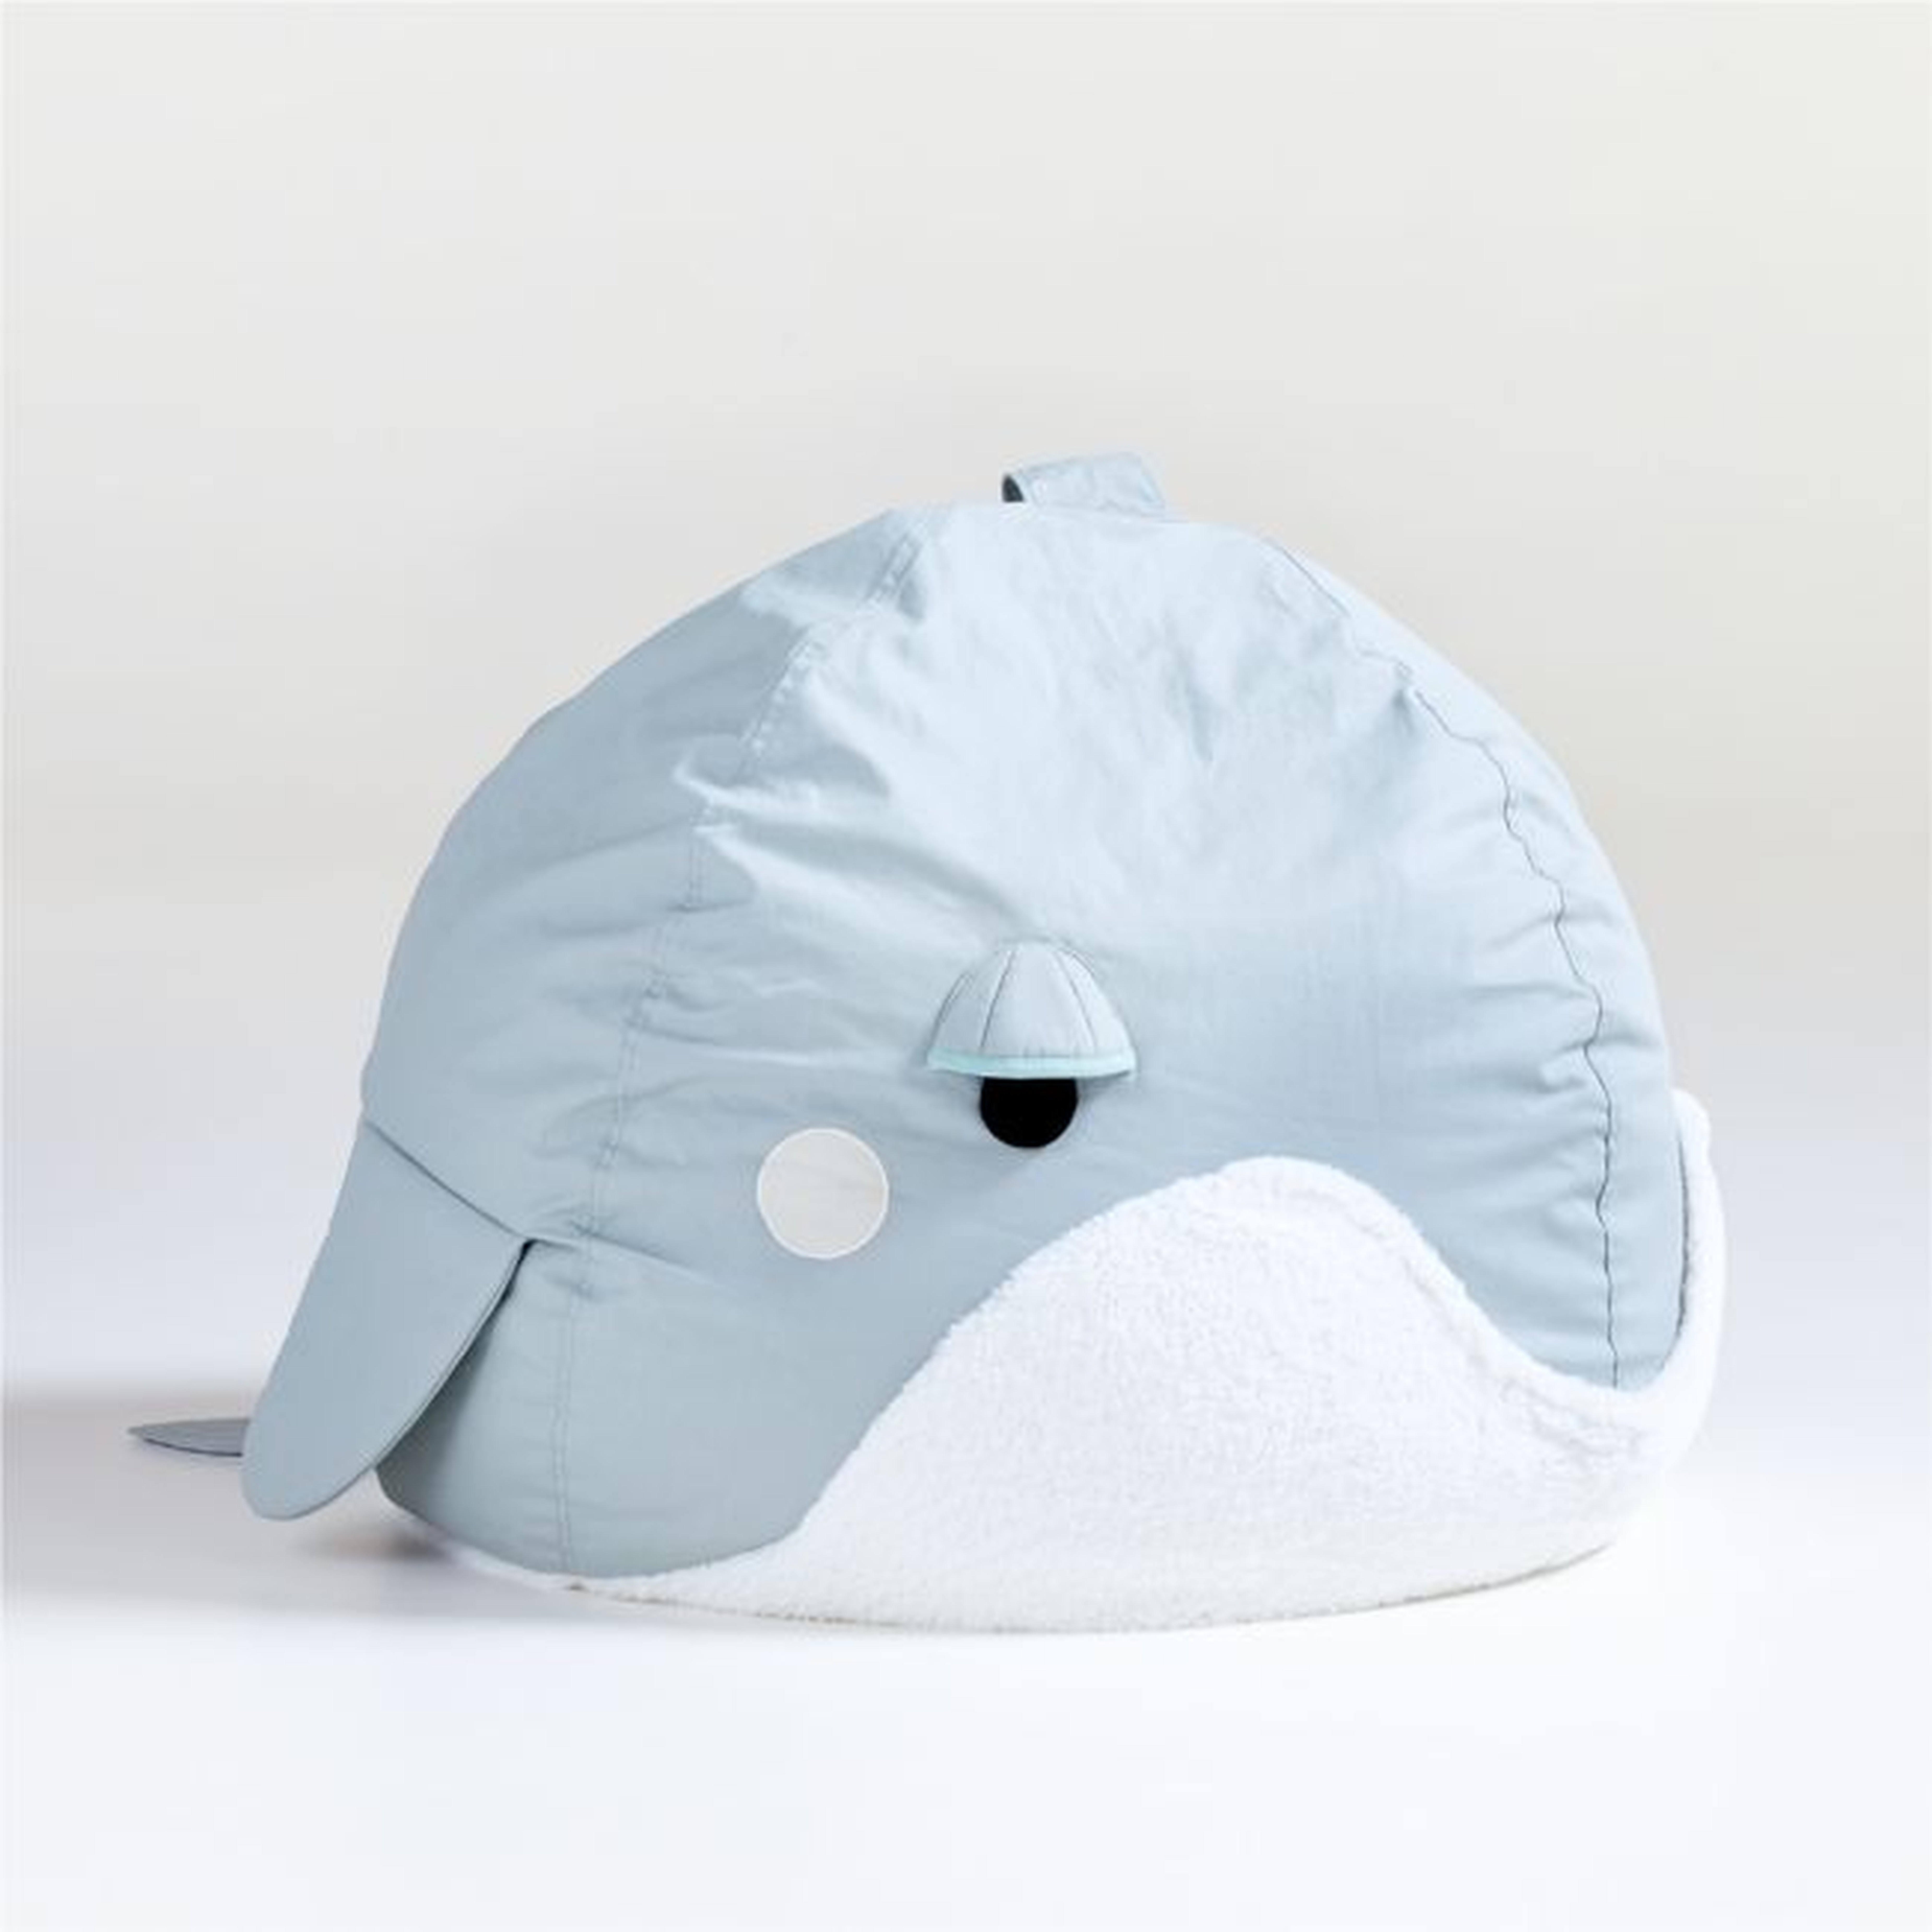 Large Whale Bean Bag Chair - Crate and Barrel